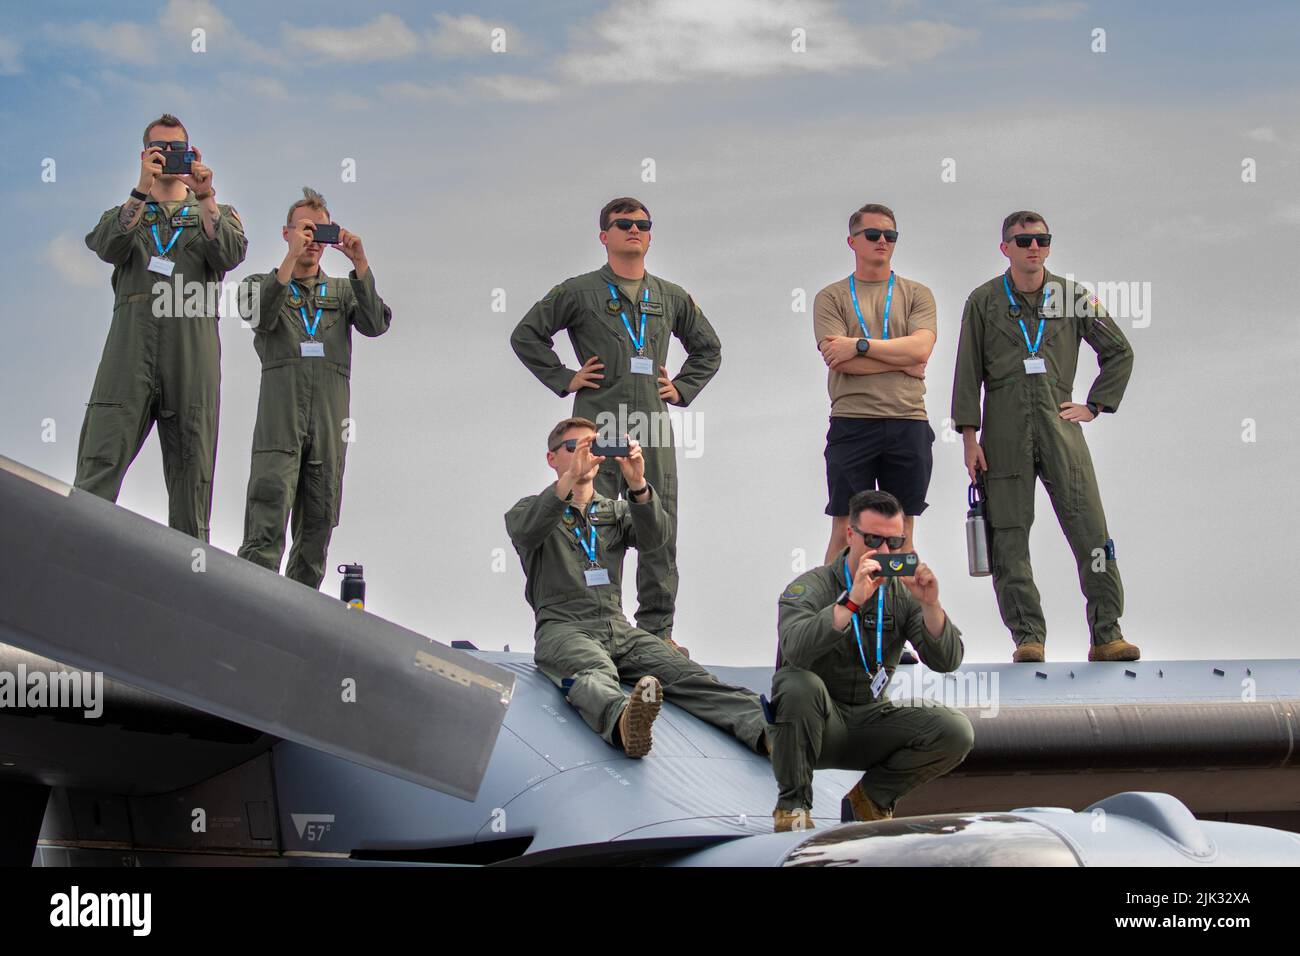 The Mildenhall boys watching their colleagues display from the roof of a V-22 Osprey. Stock Photo